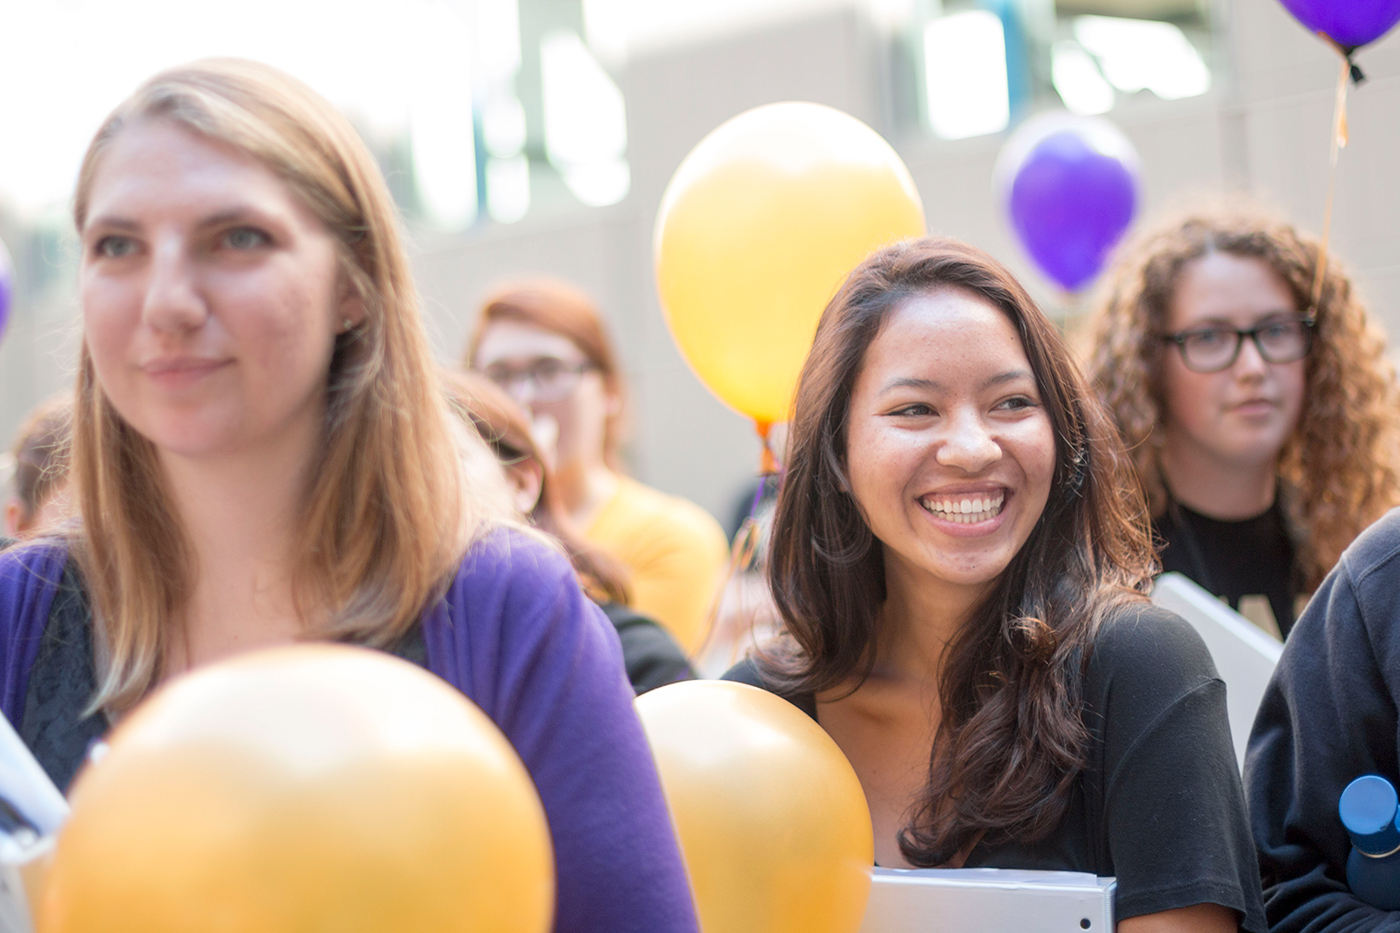 Students smiling with purple and gold balloons.